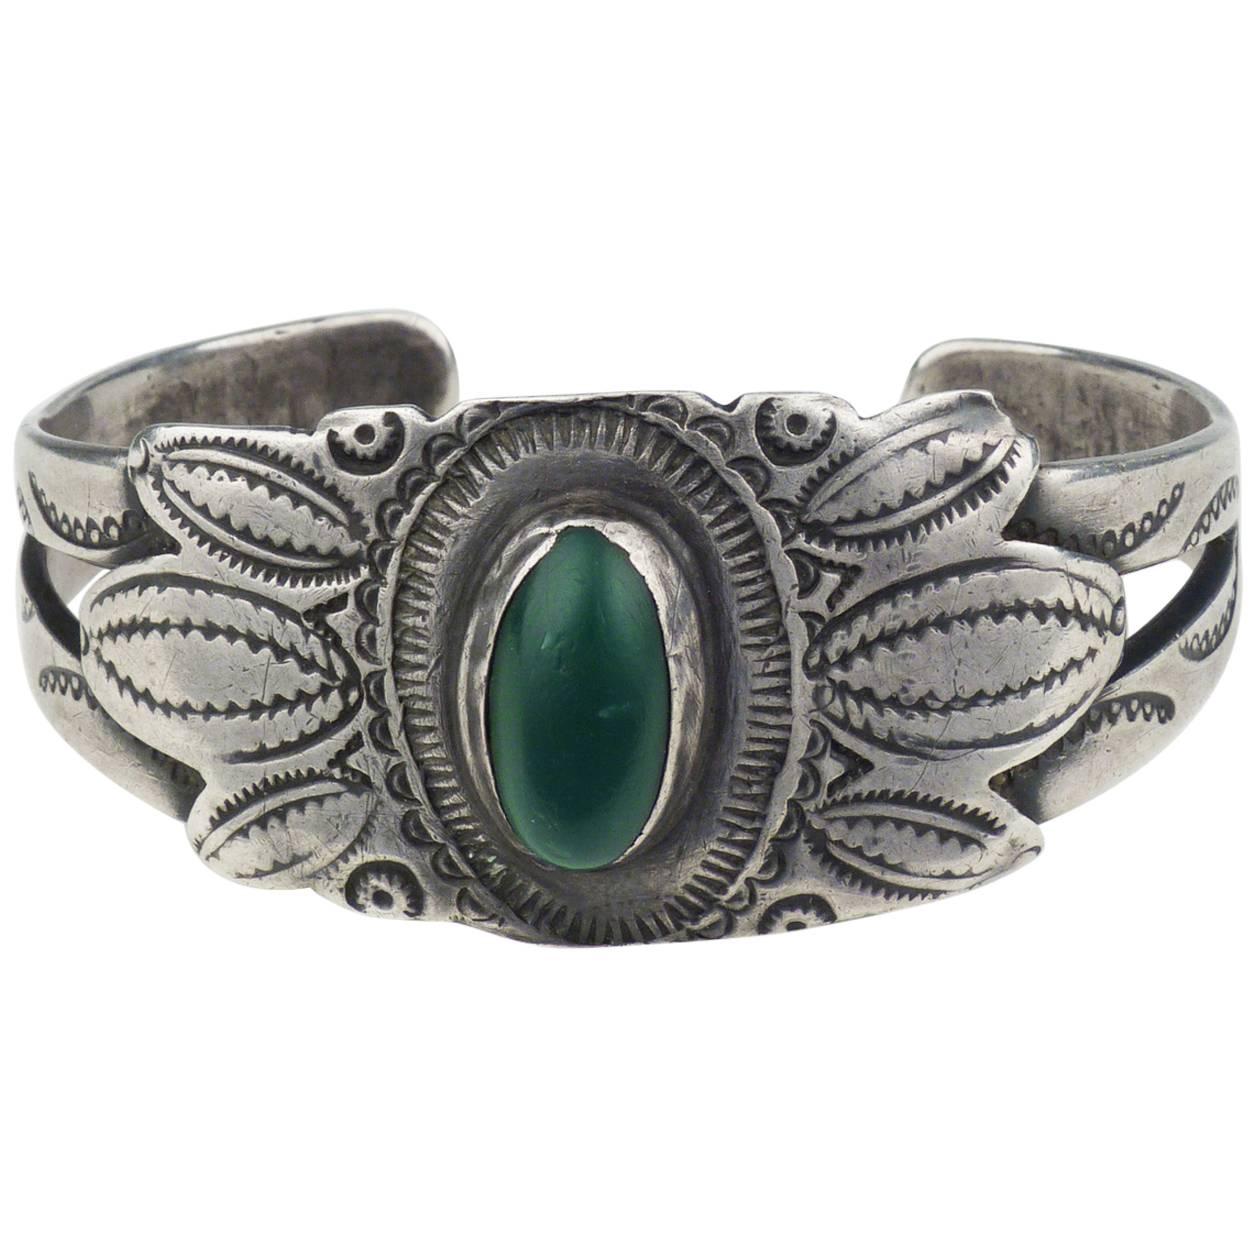 Antique Navajo Stamped Silver and Turquoise Bracelet, circa 1910 For Sale